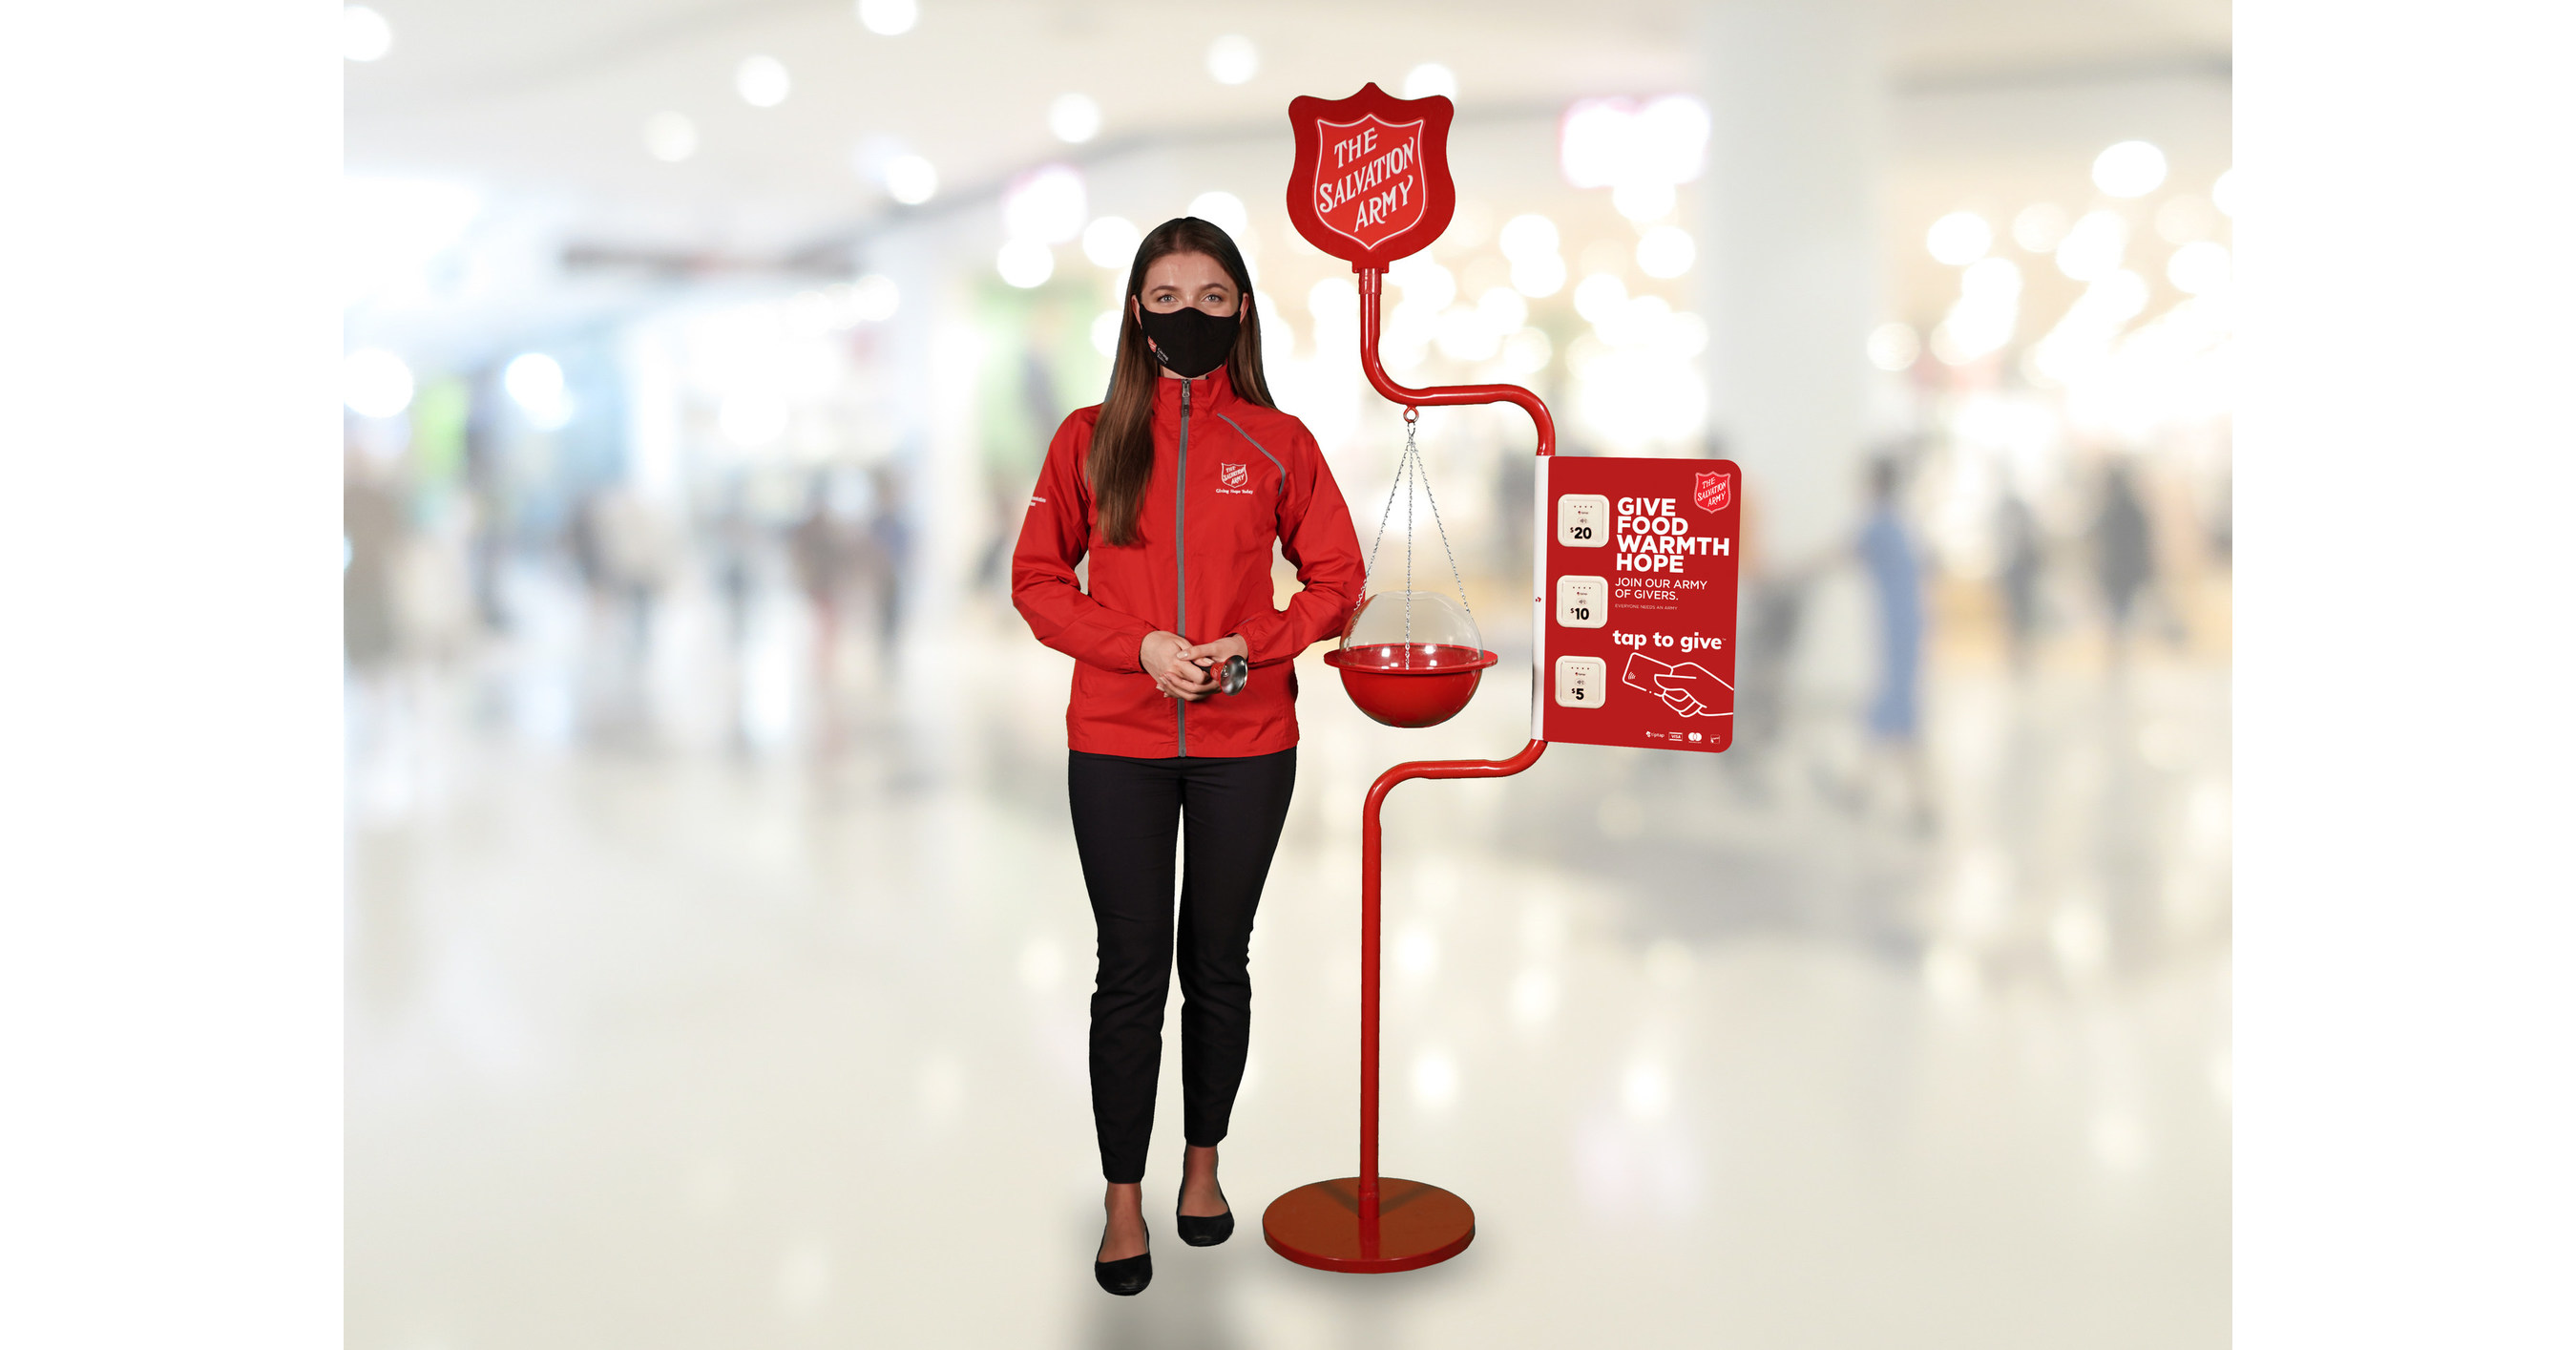 The Salvation Army in Ontario Launches 2022 Christmas Kettle Campaign with  a goal of $13.5 million to Support Individuals and Families in Need